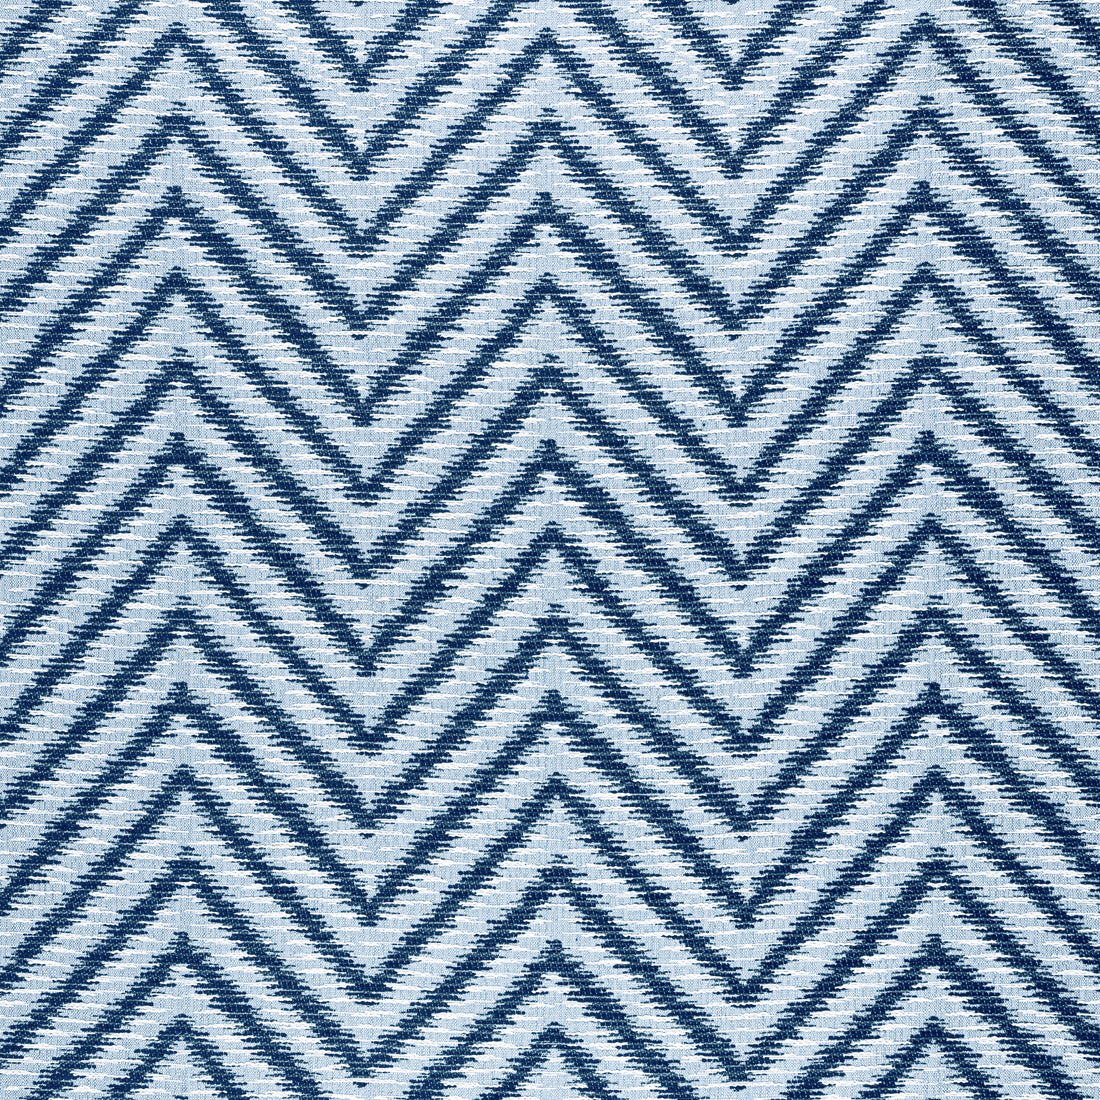 Aliso fabric in denim color - pattern number W8820 - by Thibaut in the Haven collection